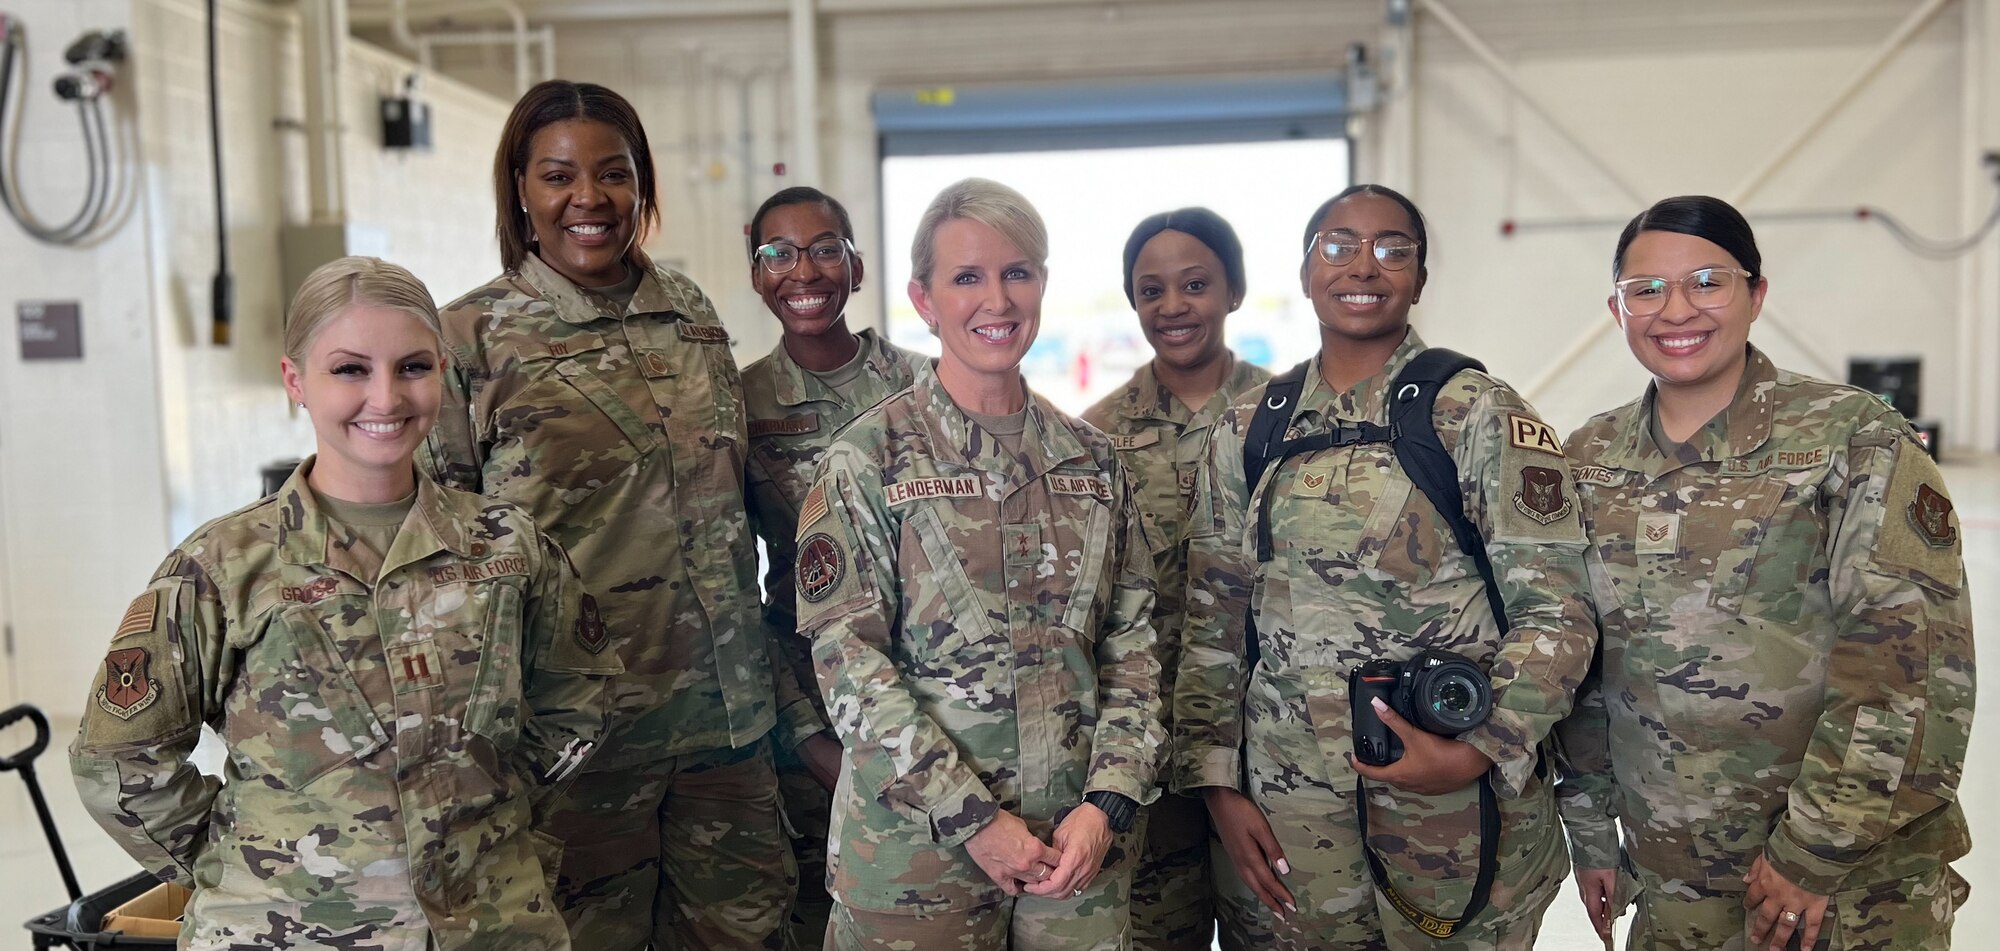 Members from the 301st Fighter Wing and Major General Laura L. Lenderman (center) pose for a photo at Dyess Air Force Base, Texas, on April 29, 2022. The Women’s Summit celebrated the 80th anniversaries of the Women Airforce Service Pilots program or WASPs, 8th Air Force, and the 317th Airlift Wing. (U.S. Air Force photo by Staff Sgt. Nije Hightower)